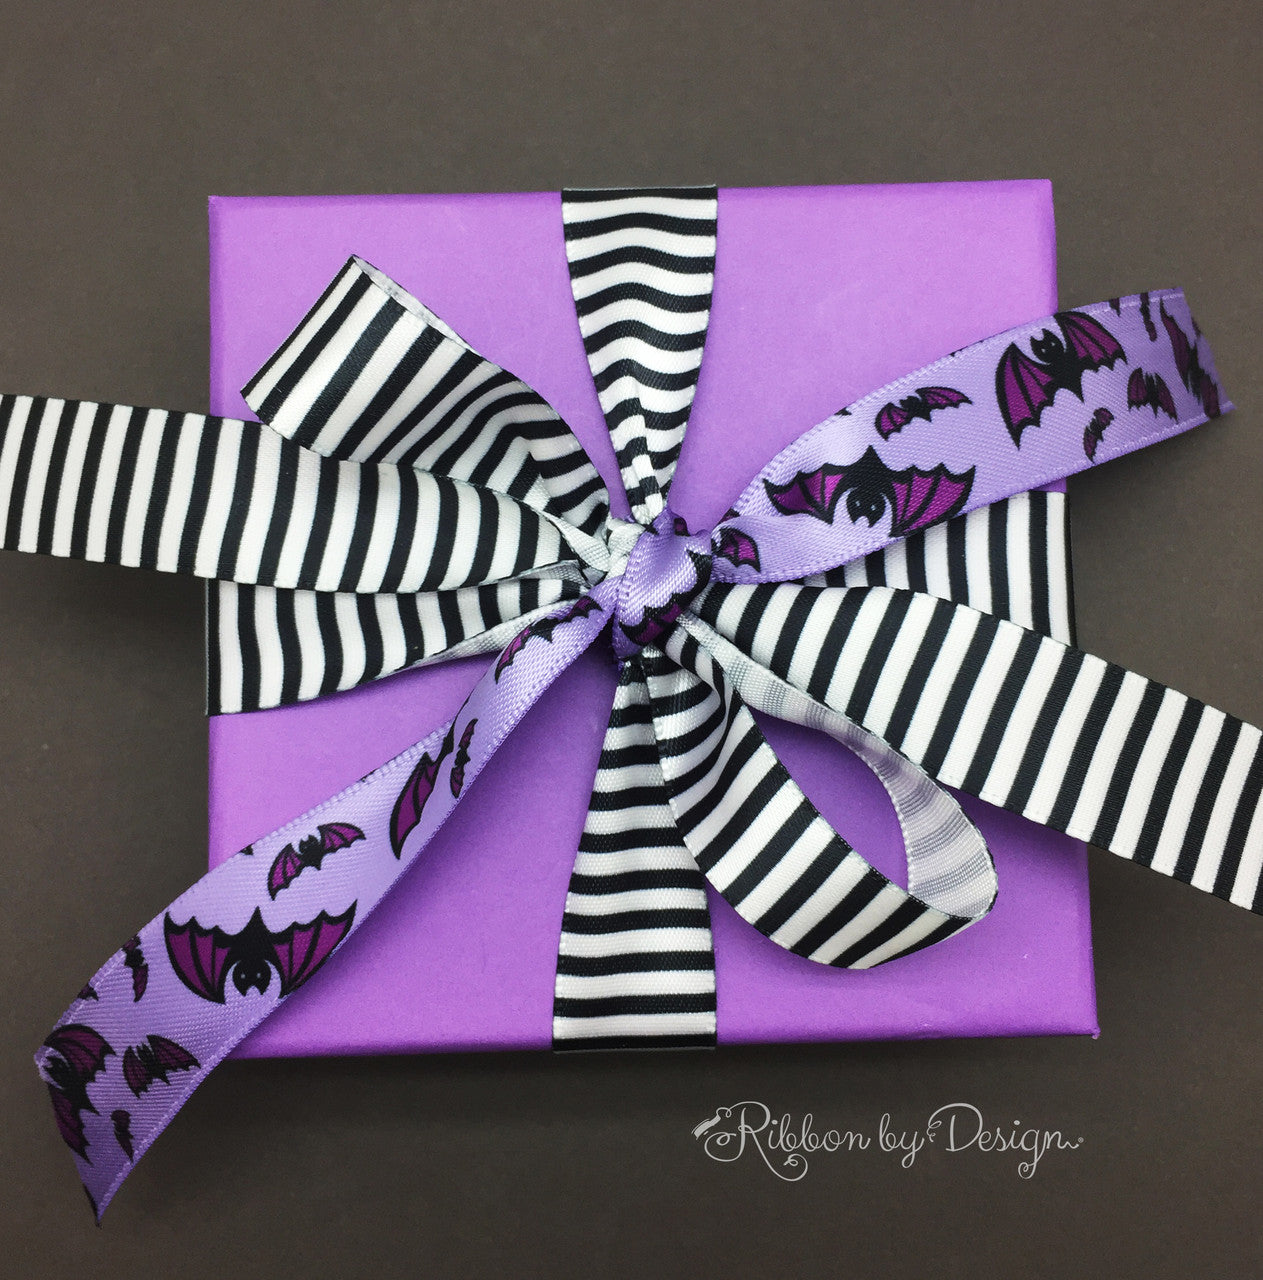 Add some purple bats to this fun little package for a Halloween themed gift or favor!